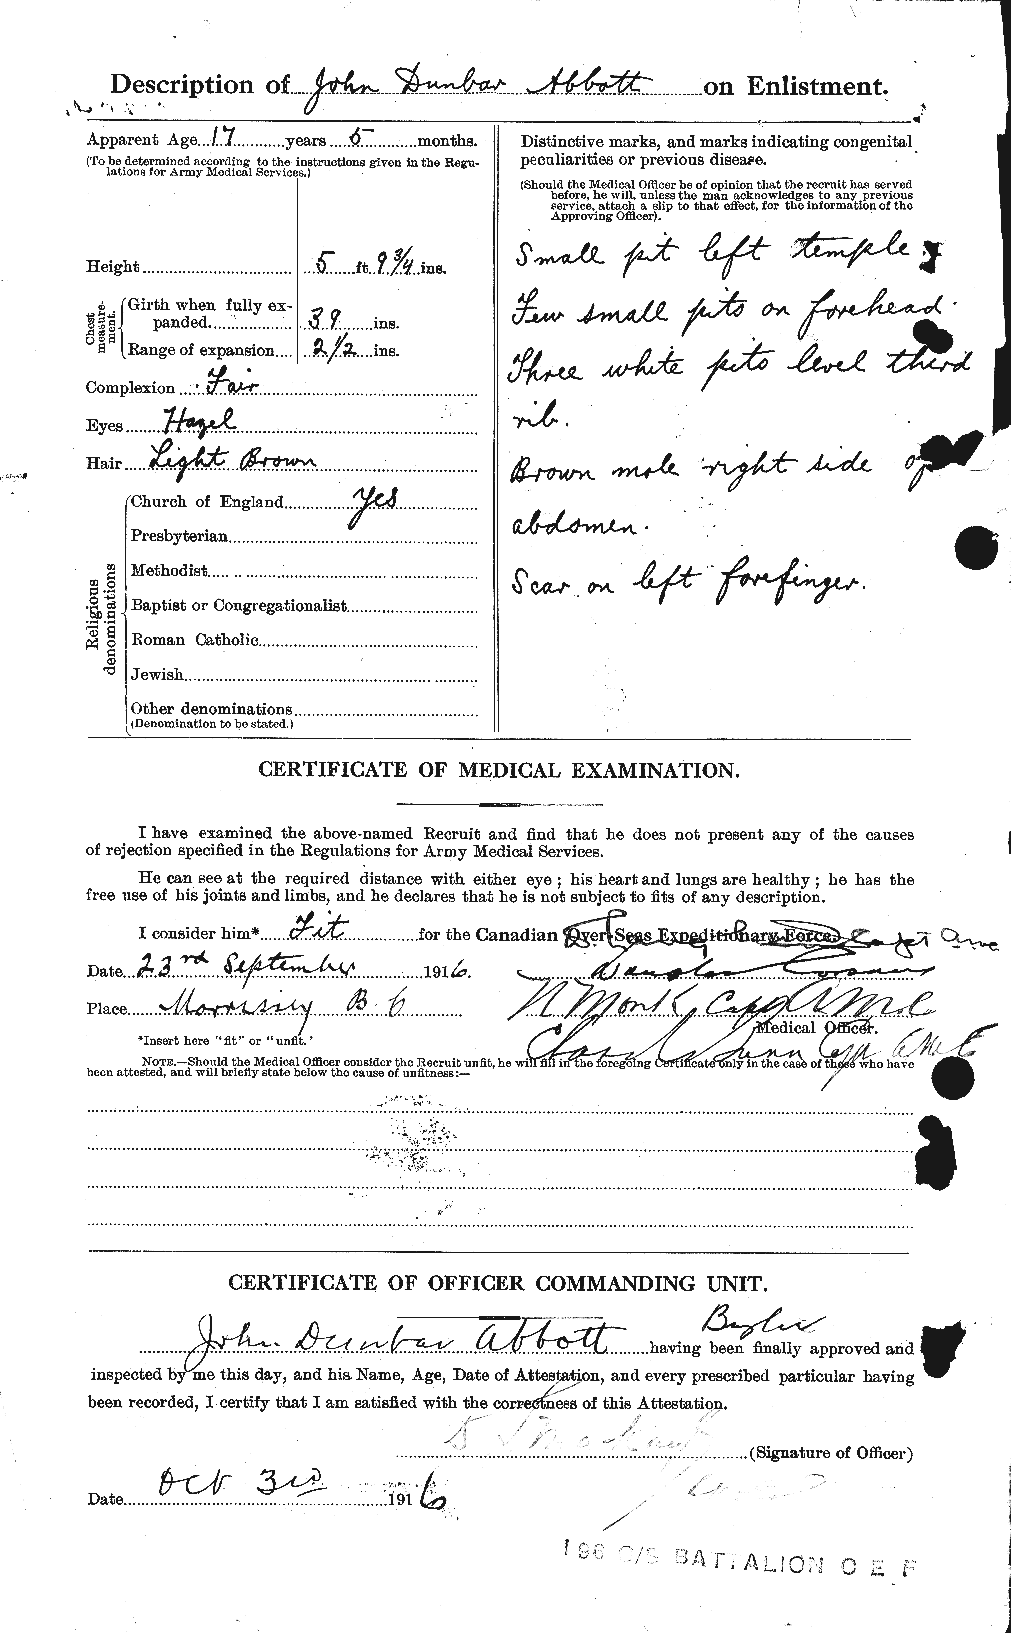 Personnel Records of the First World War - CEF 200991b